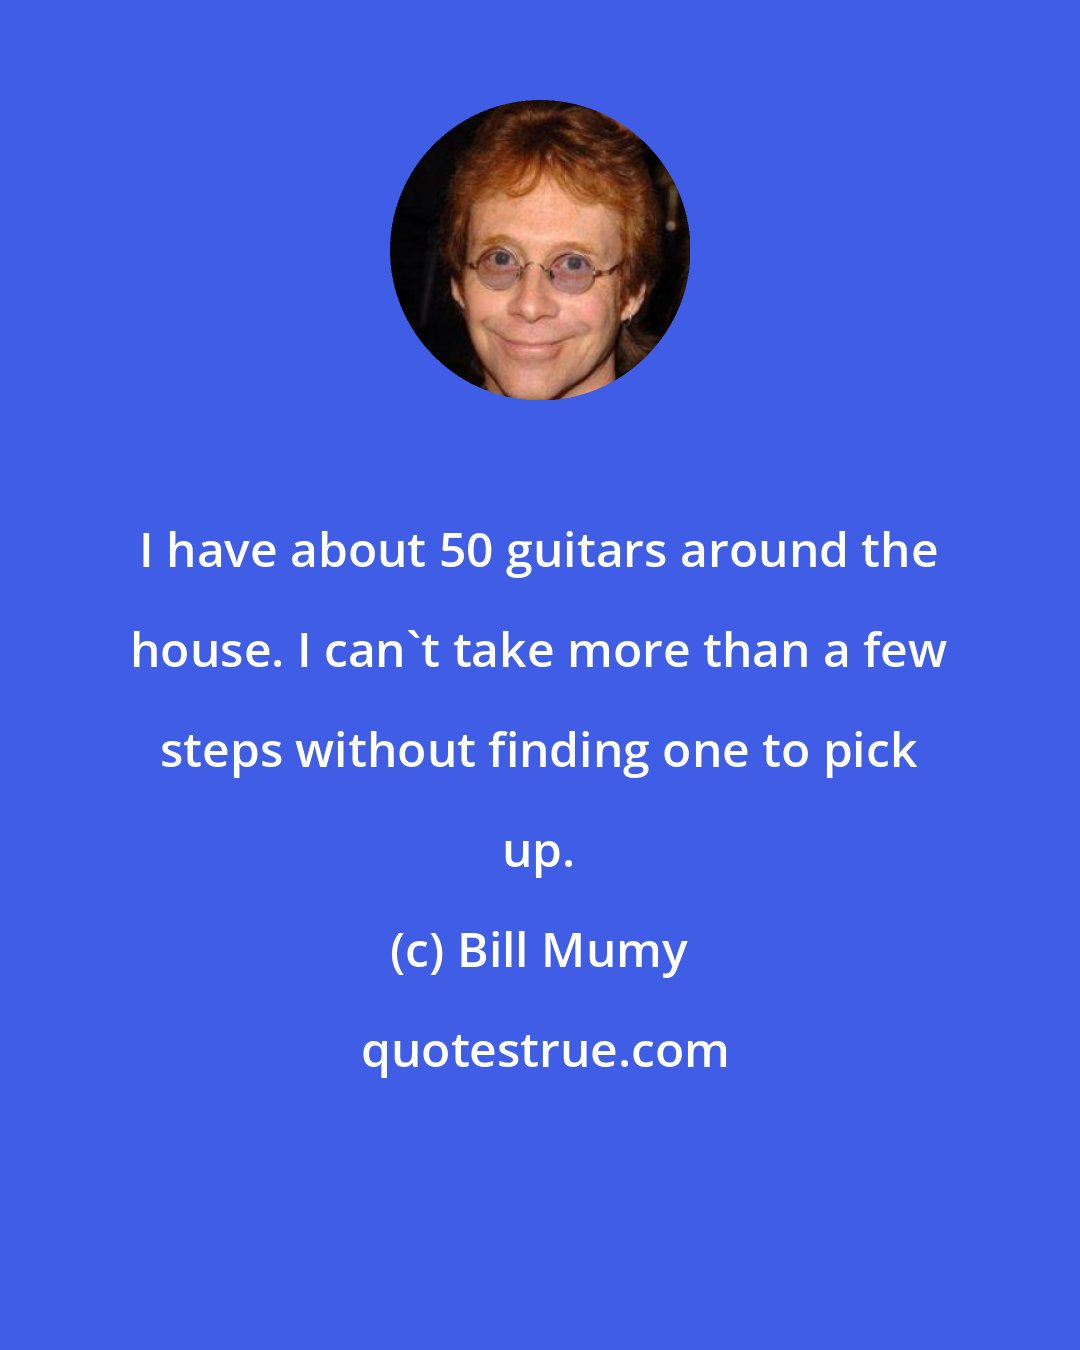 Bill Mumy: I have about 50 guitars around the house. I can't take more than a few steps without finding one to pick up.